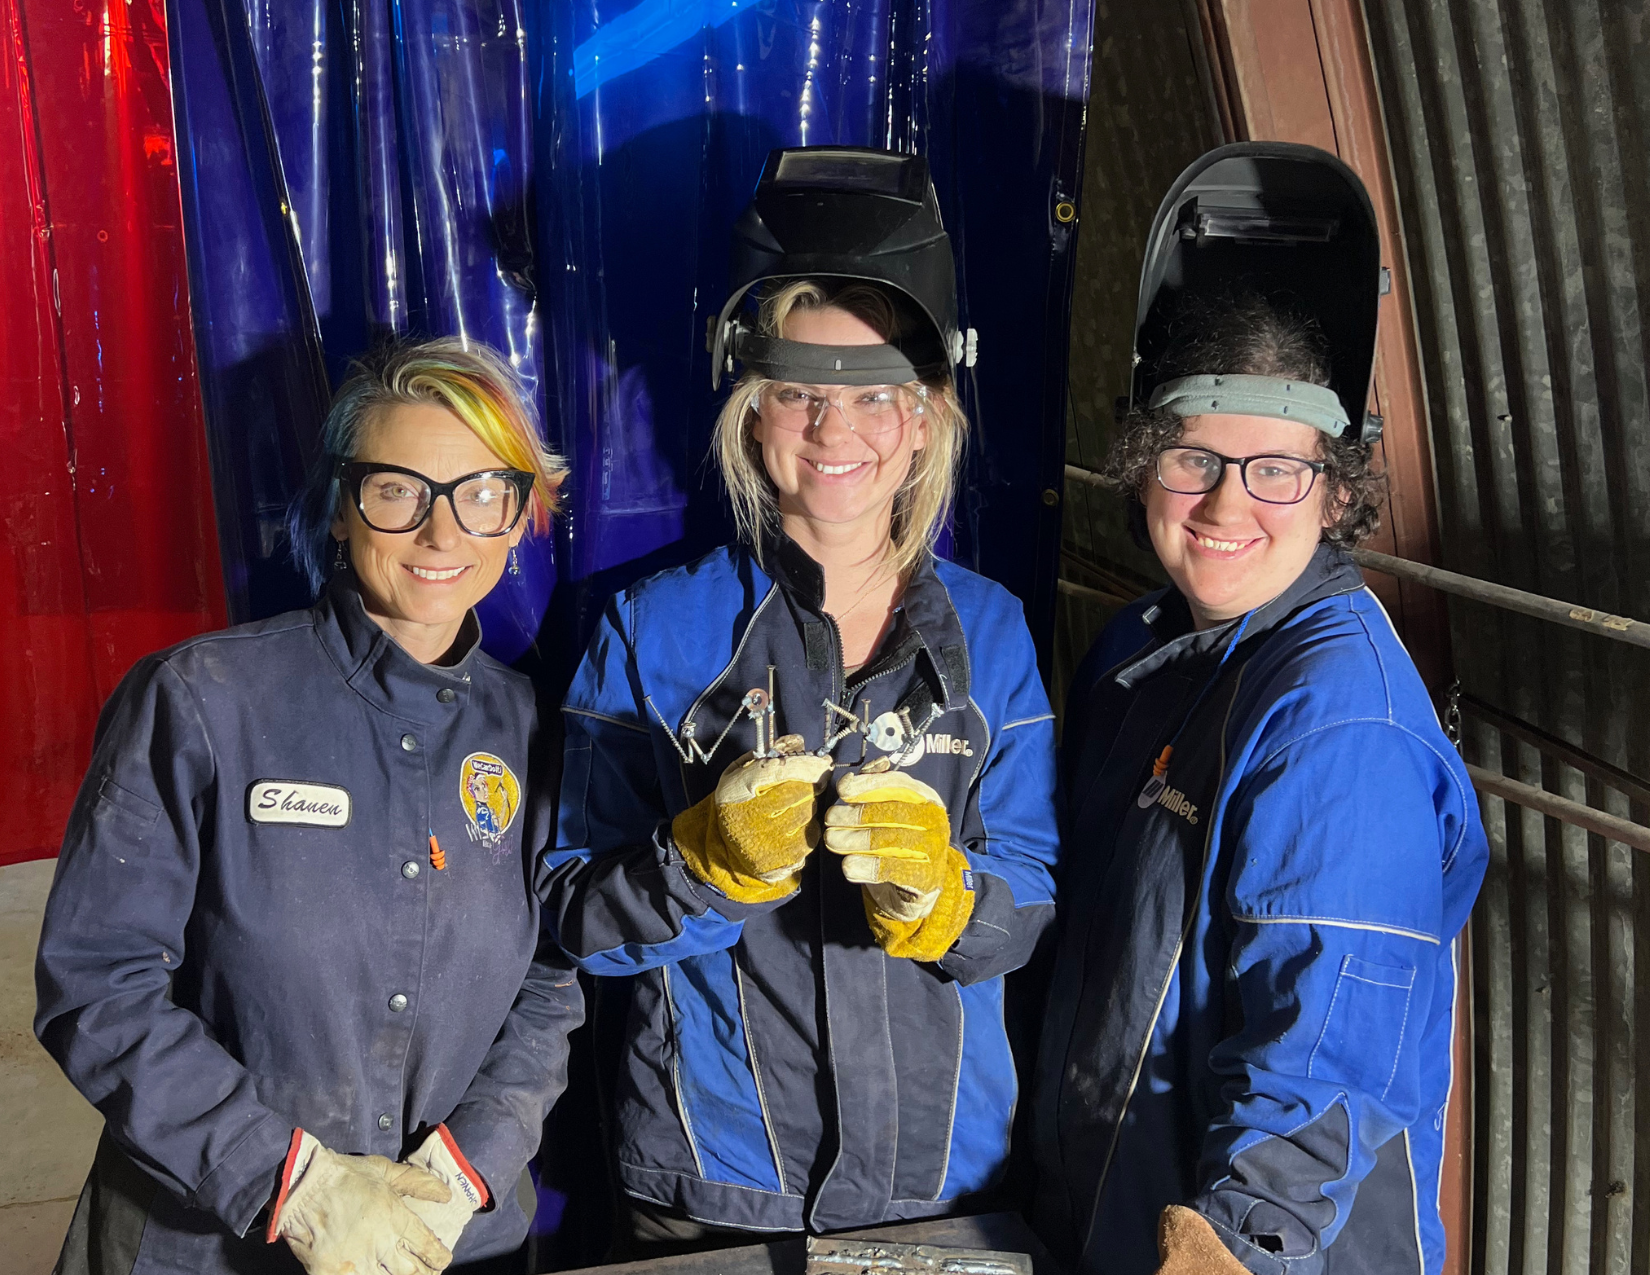 Lacy Cain Baranack and two female welders showing off their skills in welding